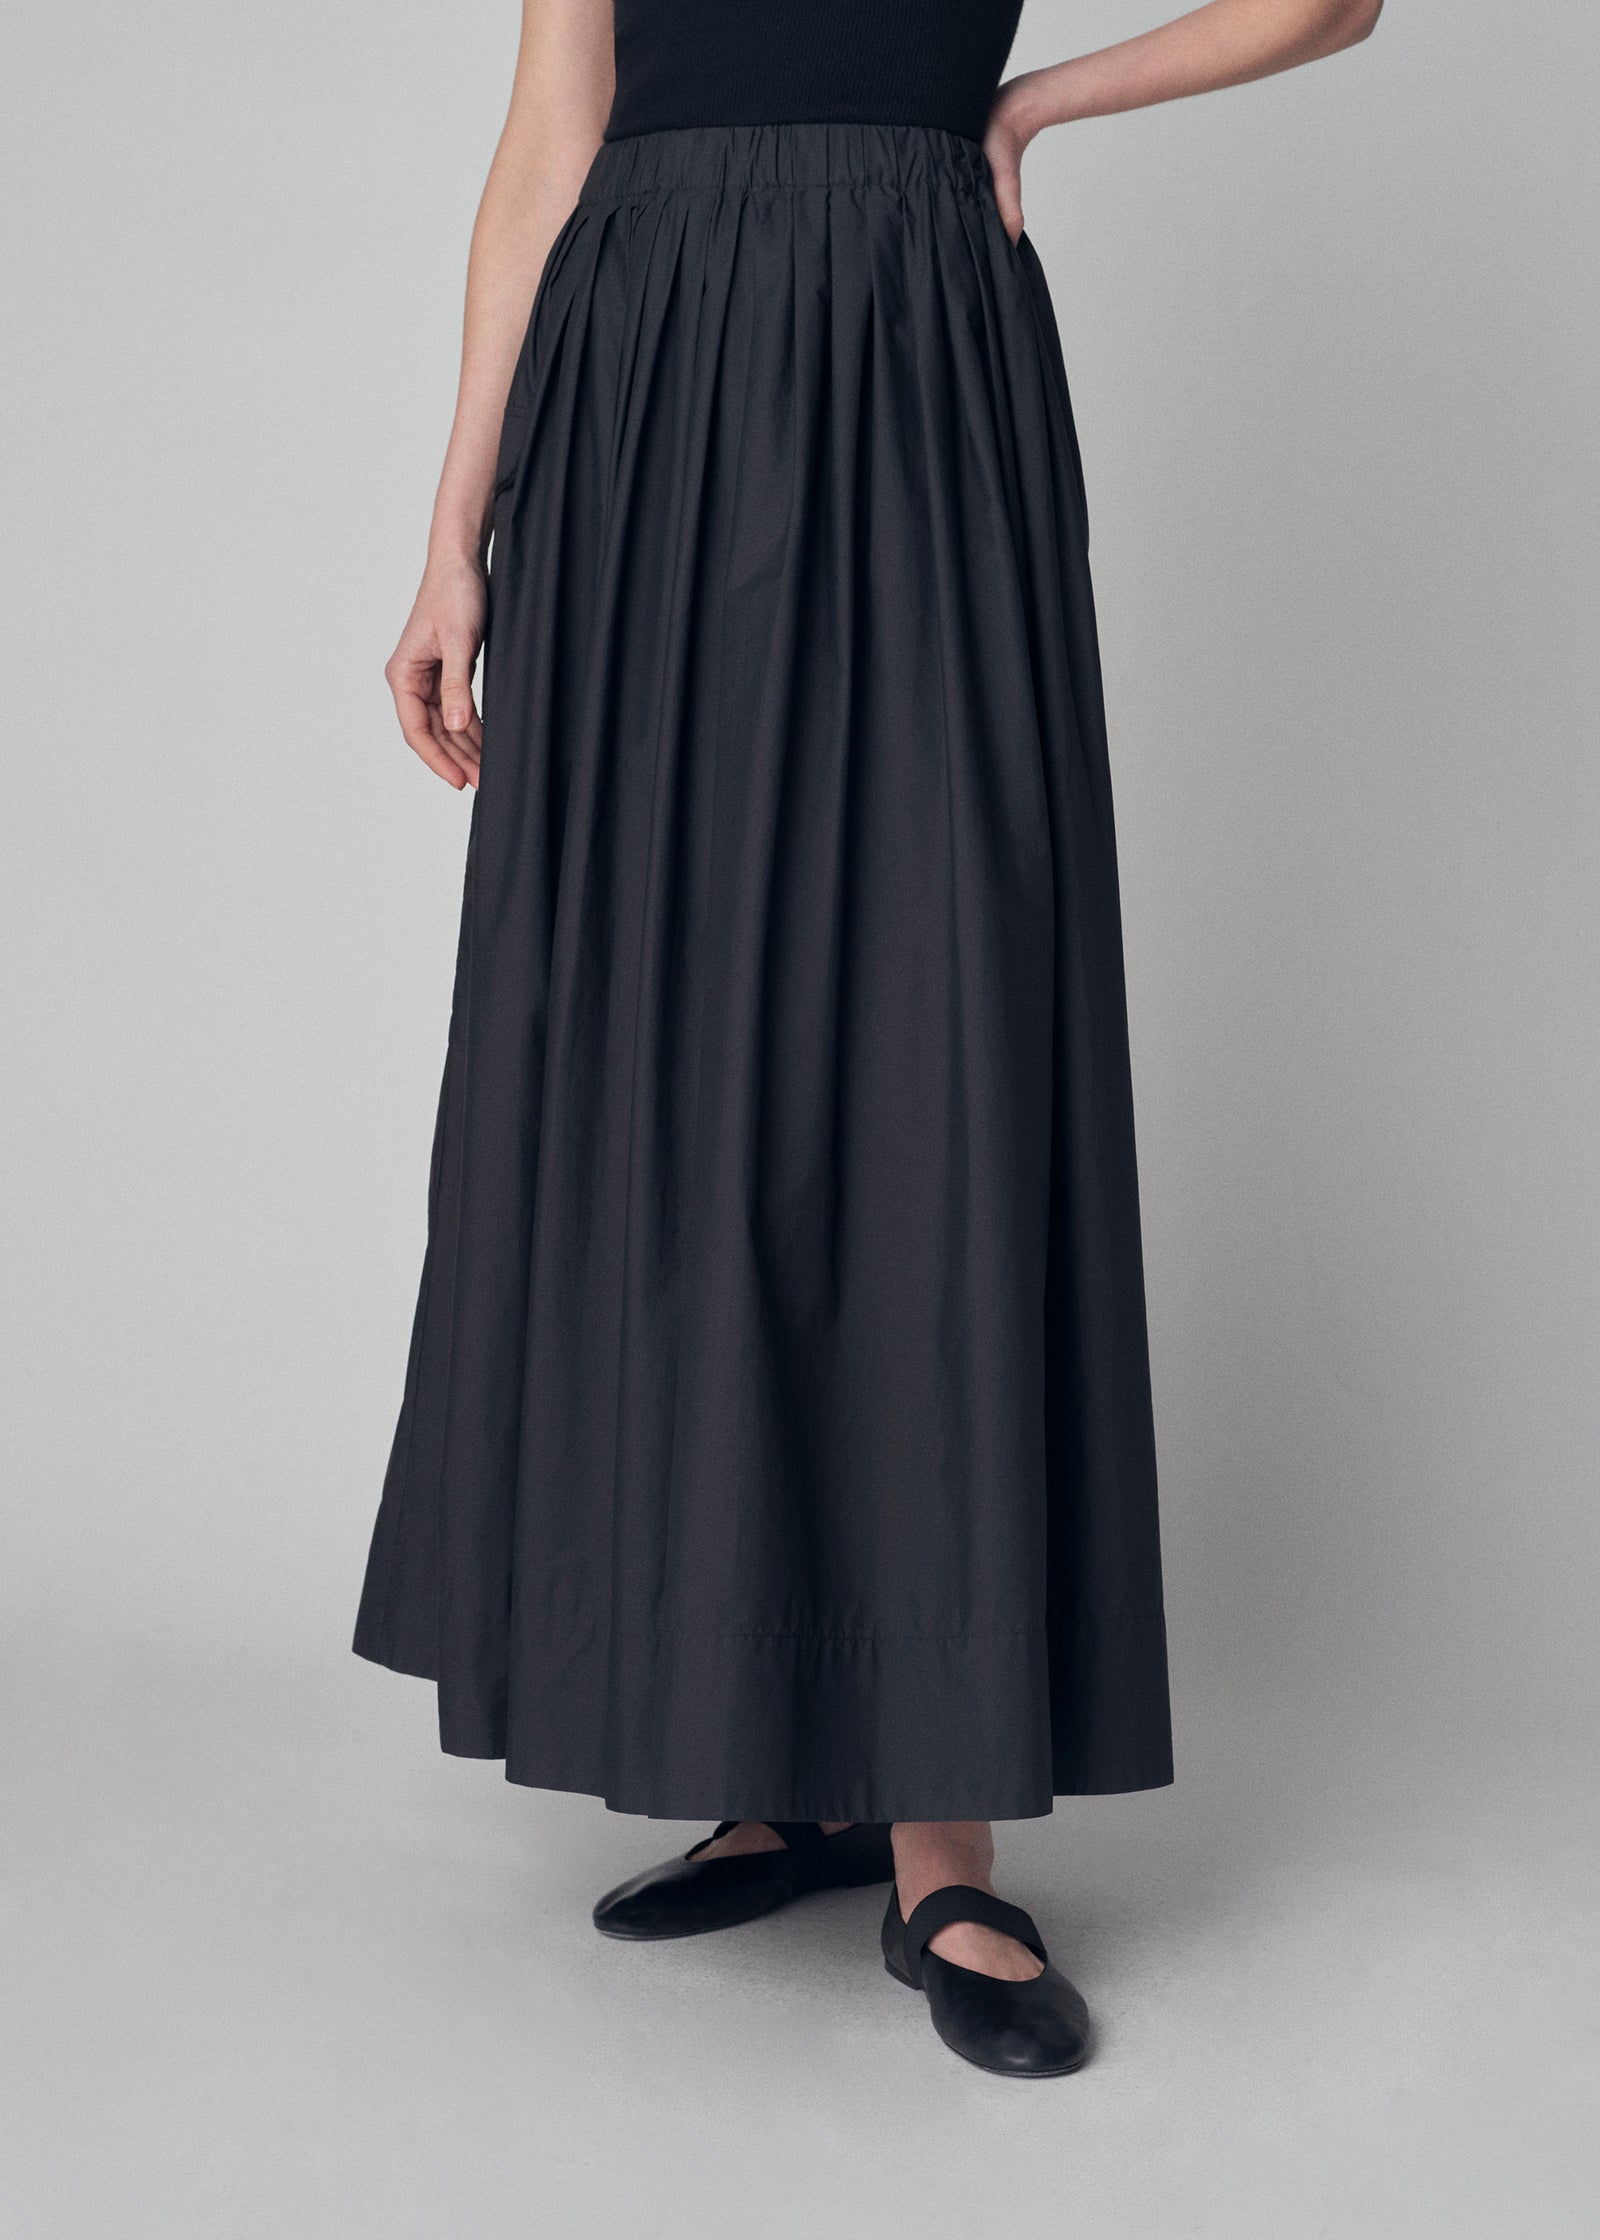 Pull On Midi Skirt in Cotton Poplin -  Black - CO Collections